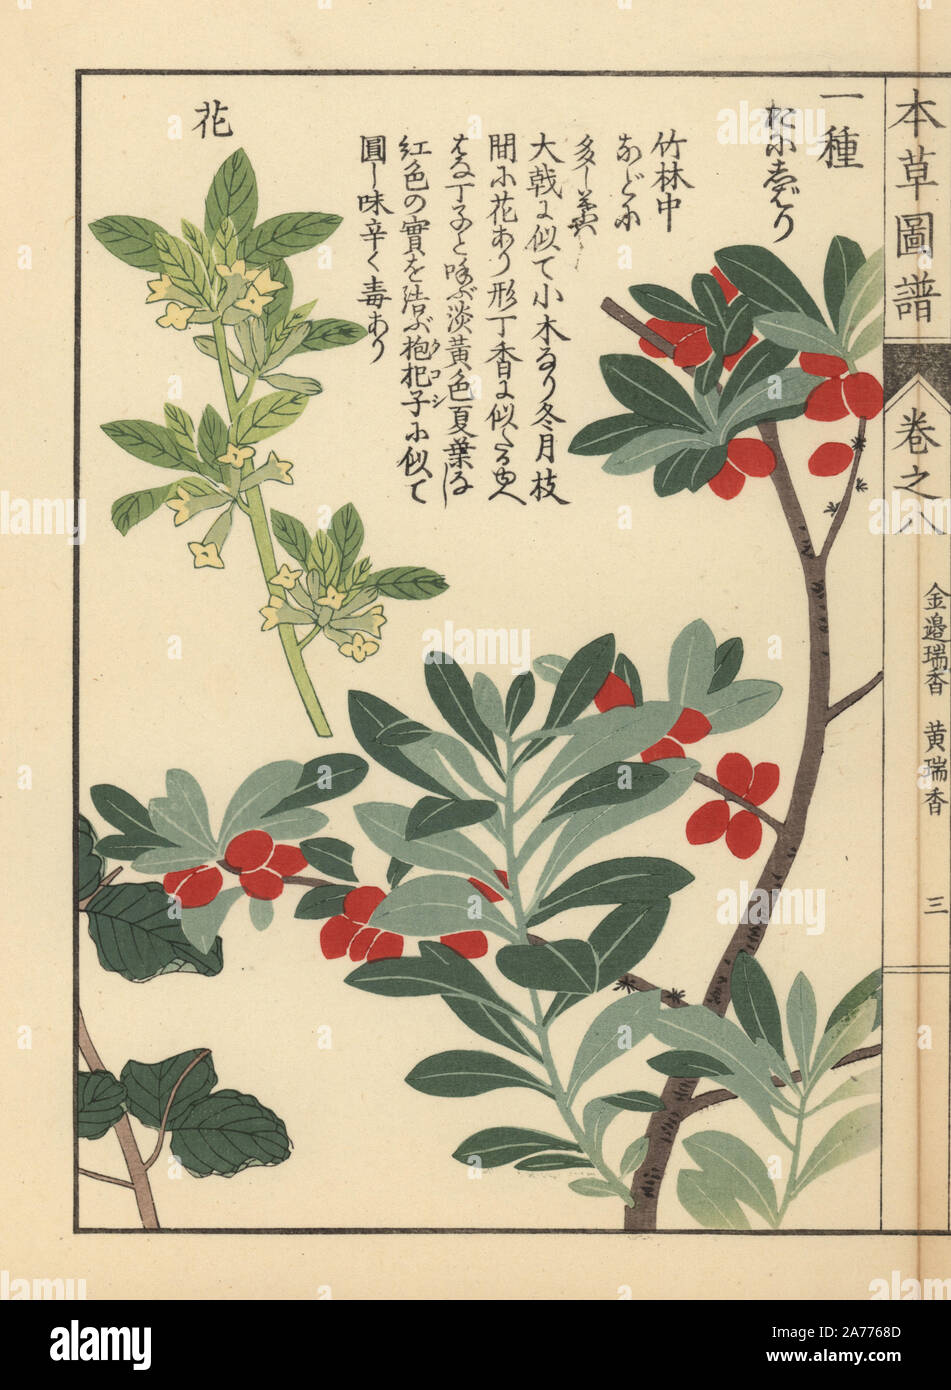 Spring daphne, Daphne pseudo-mezereum A. Gray. Colour-printed woodblock engraving by Kan'en Iwasaki from 'Honzo Zufu,' an Illustrated Guide to Medicinal Plants, Japan, 1884. Iwasaki (1786-1842) was a Japanese botanist, entomologist and zoologist. He was one of the first Japanese botanists to incorporate western knowledge into his studies. Stock Photo